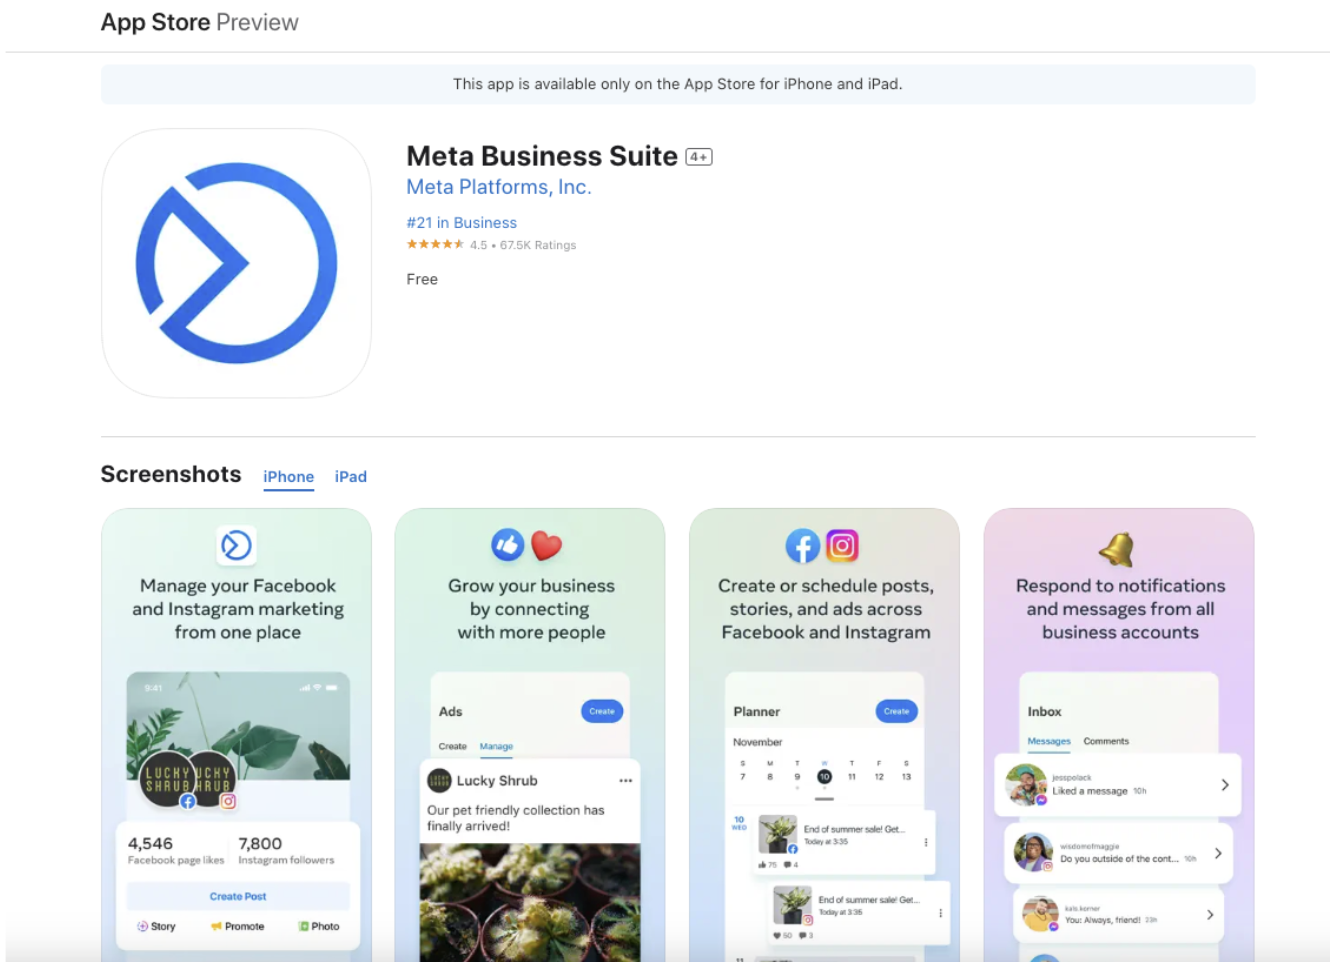 A screenshot of the App Store preview of Meta Business Suite. The image shows four preview boxes that inform the user of the features available such as Manage your Facebook and Instagram marketing from one place and Grow your business by connecting with more people. 